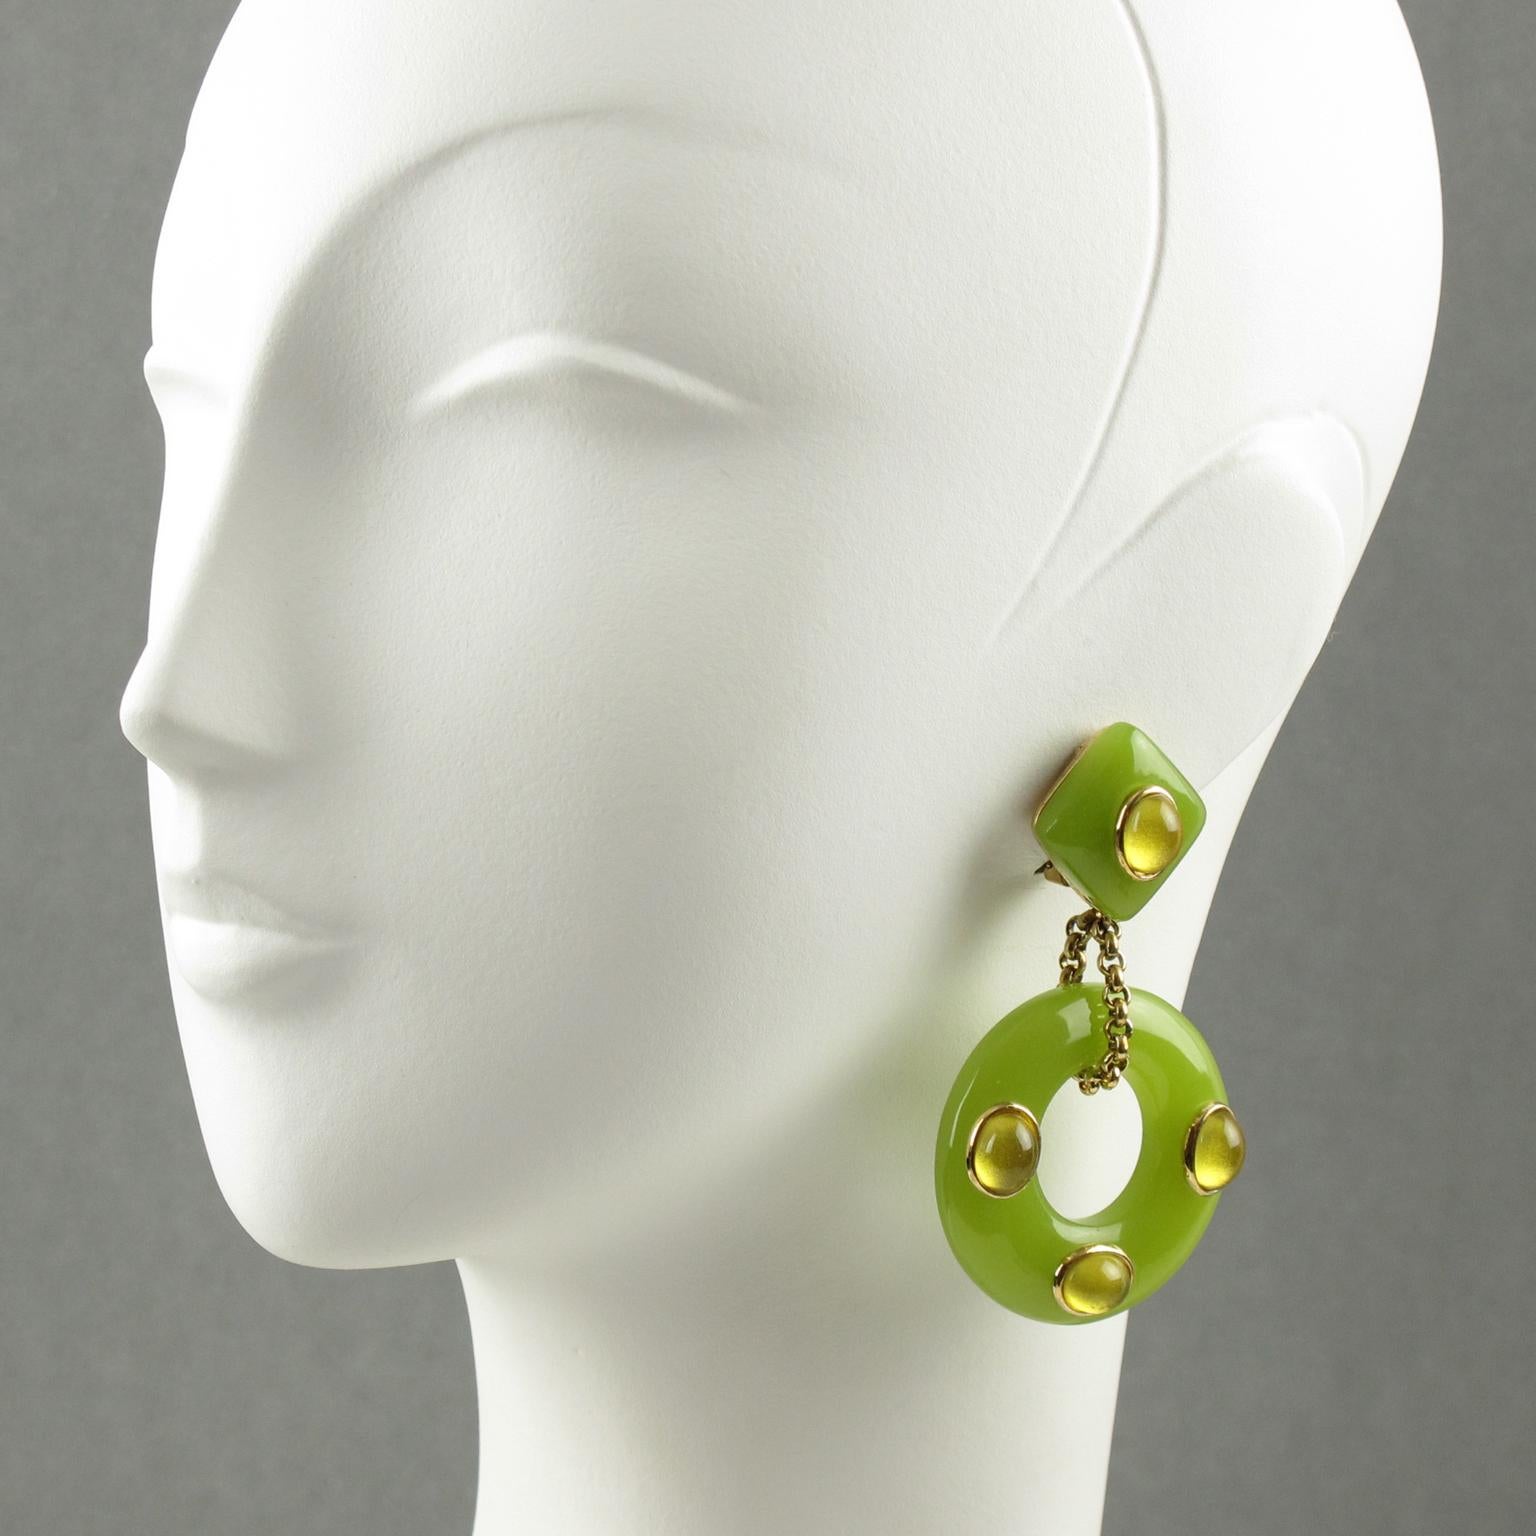 These lovely resin dangling clip-on earrings by Replica Italy are certain to enhance the beauty and elegance of any collection or outfit. They are made of gold plated metal set on dangling resin donut in apple green color topped with vaseline resin